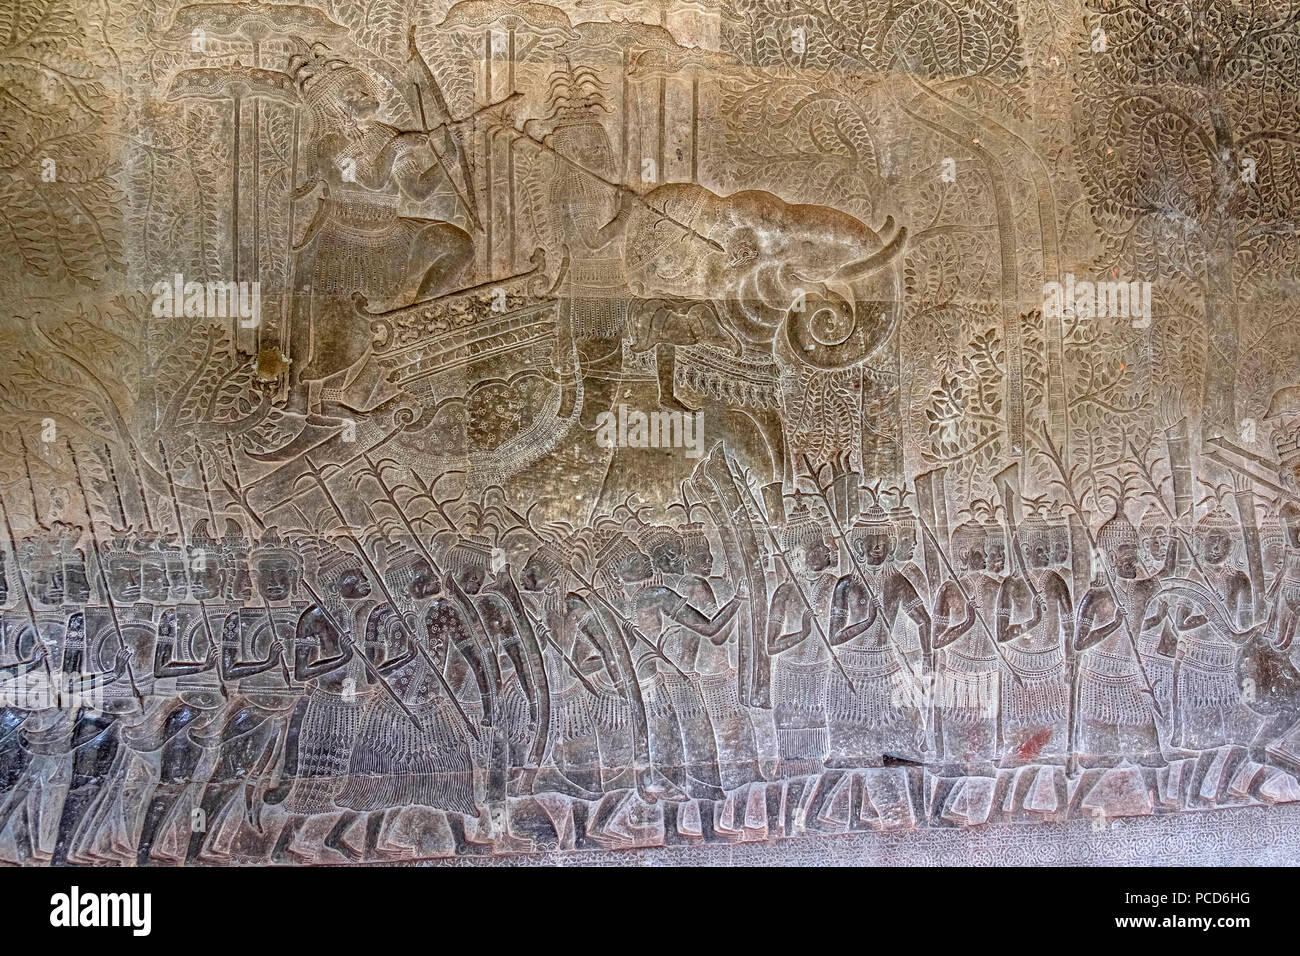 Bas relief of the commander of the vanguard riding an elephant and the army of King Suryavarman II at Angkor Wat, UNESCO, Siem Reap, Cambodia Stock Photo